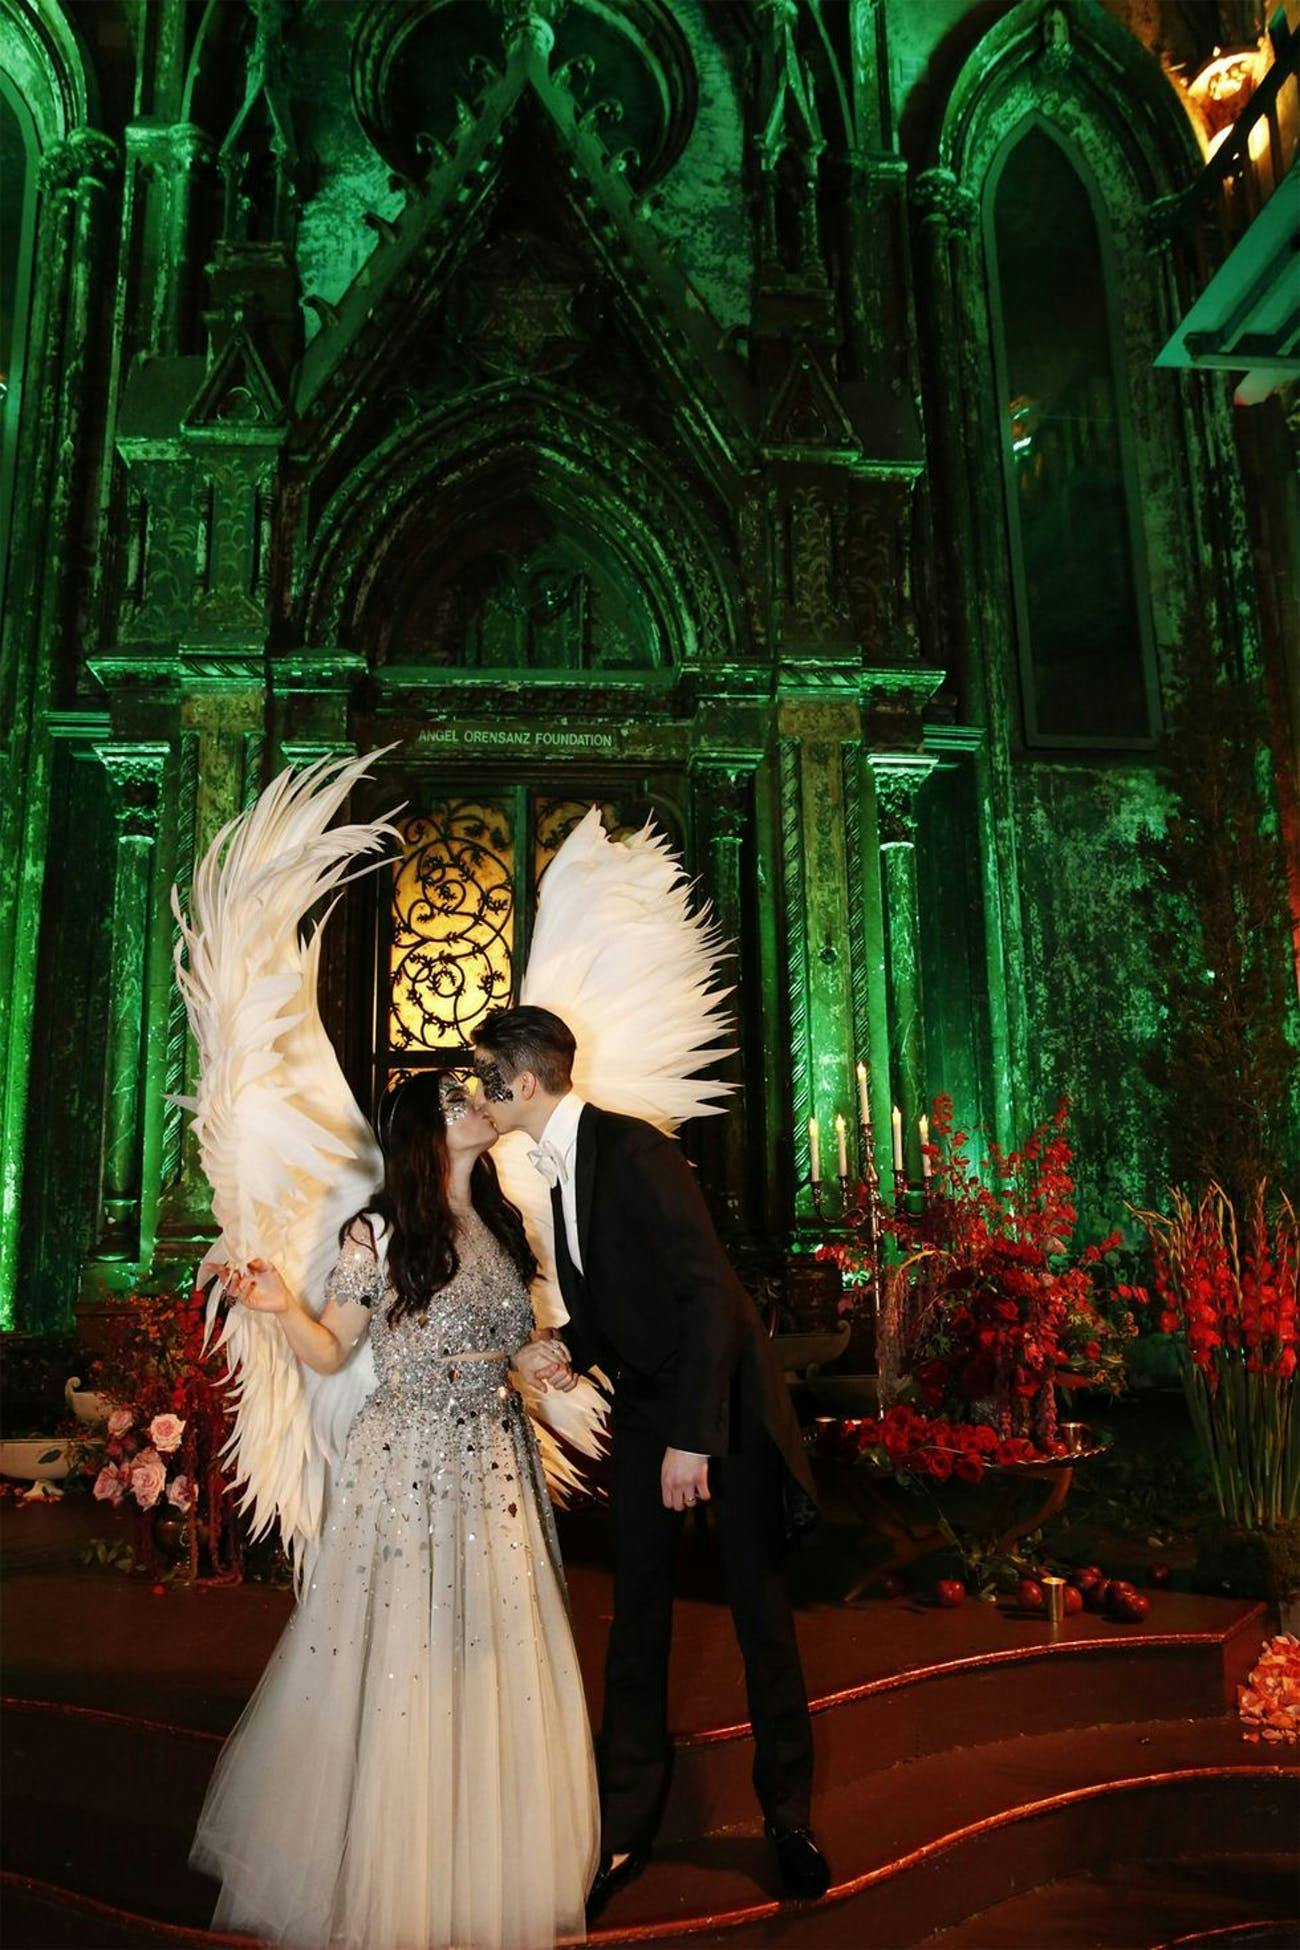 Creative good and evil themed wedding | PartySlate